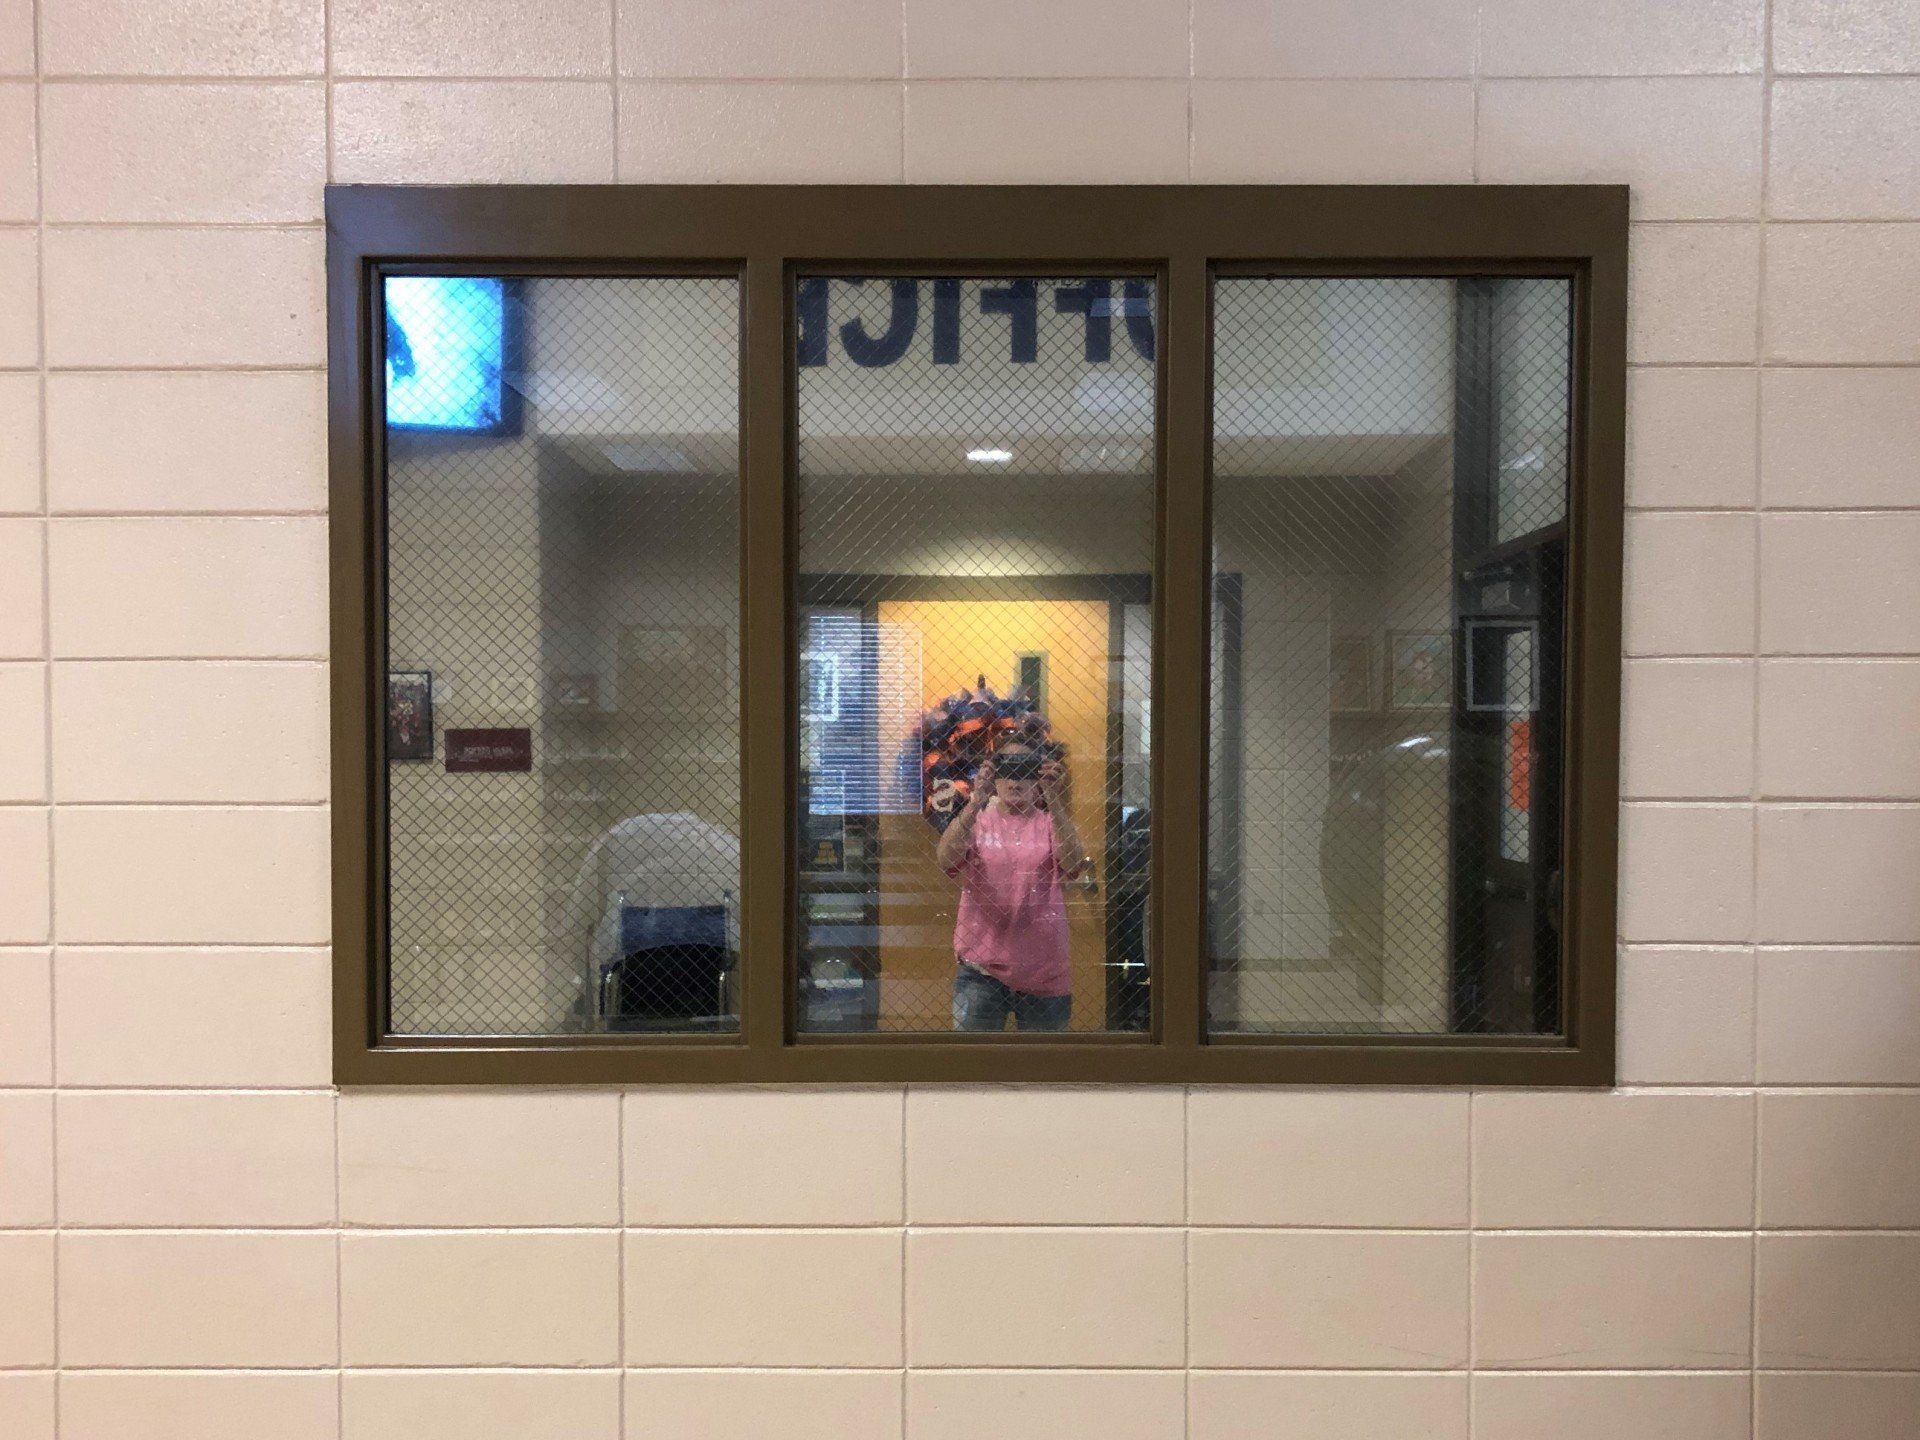 Privacy added to library window at Clanton Middle School - Professional tint installation in Clanton, AL